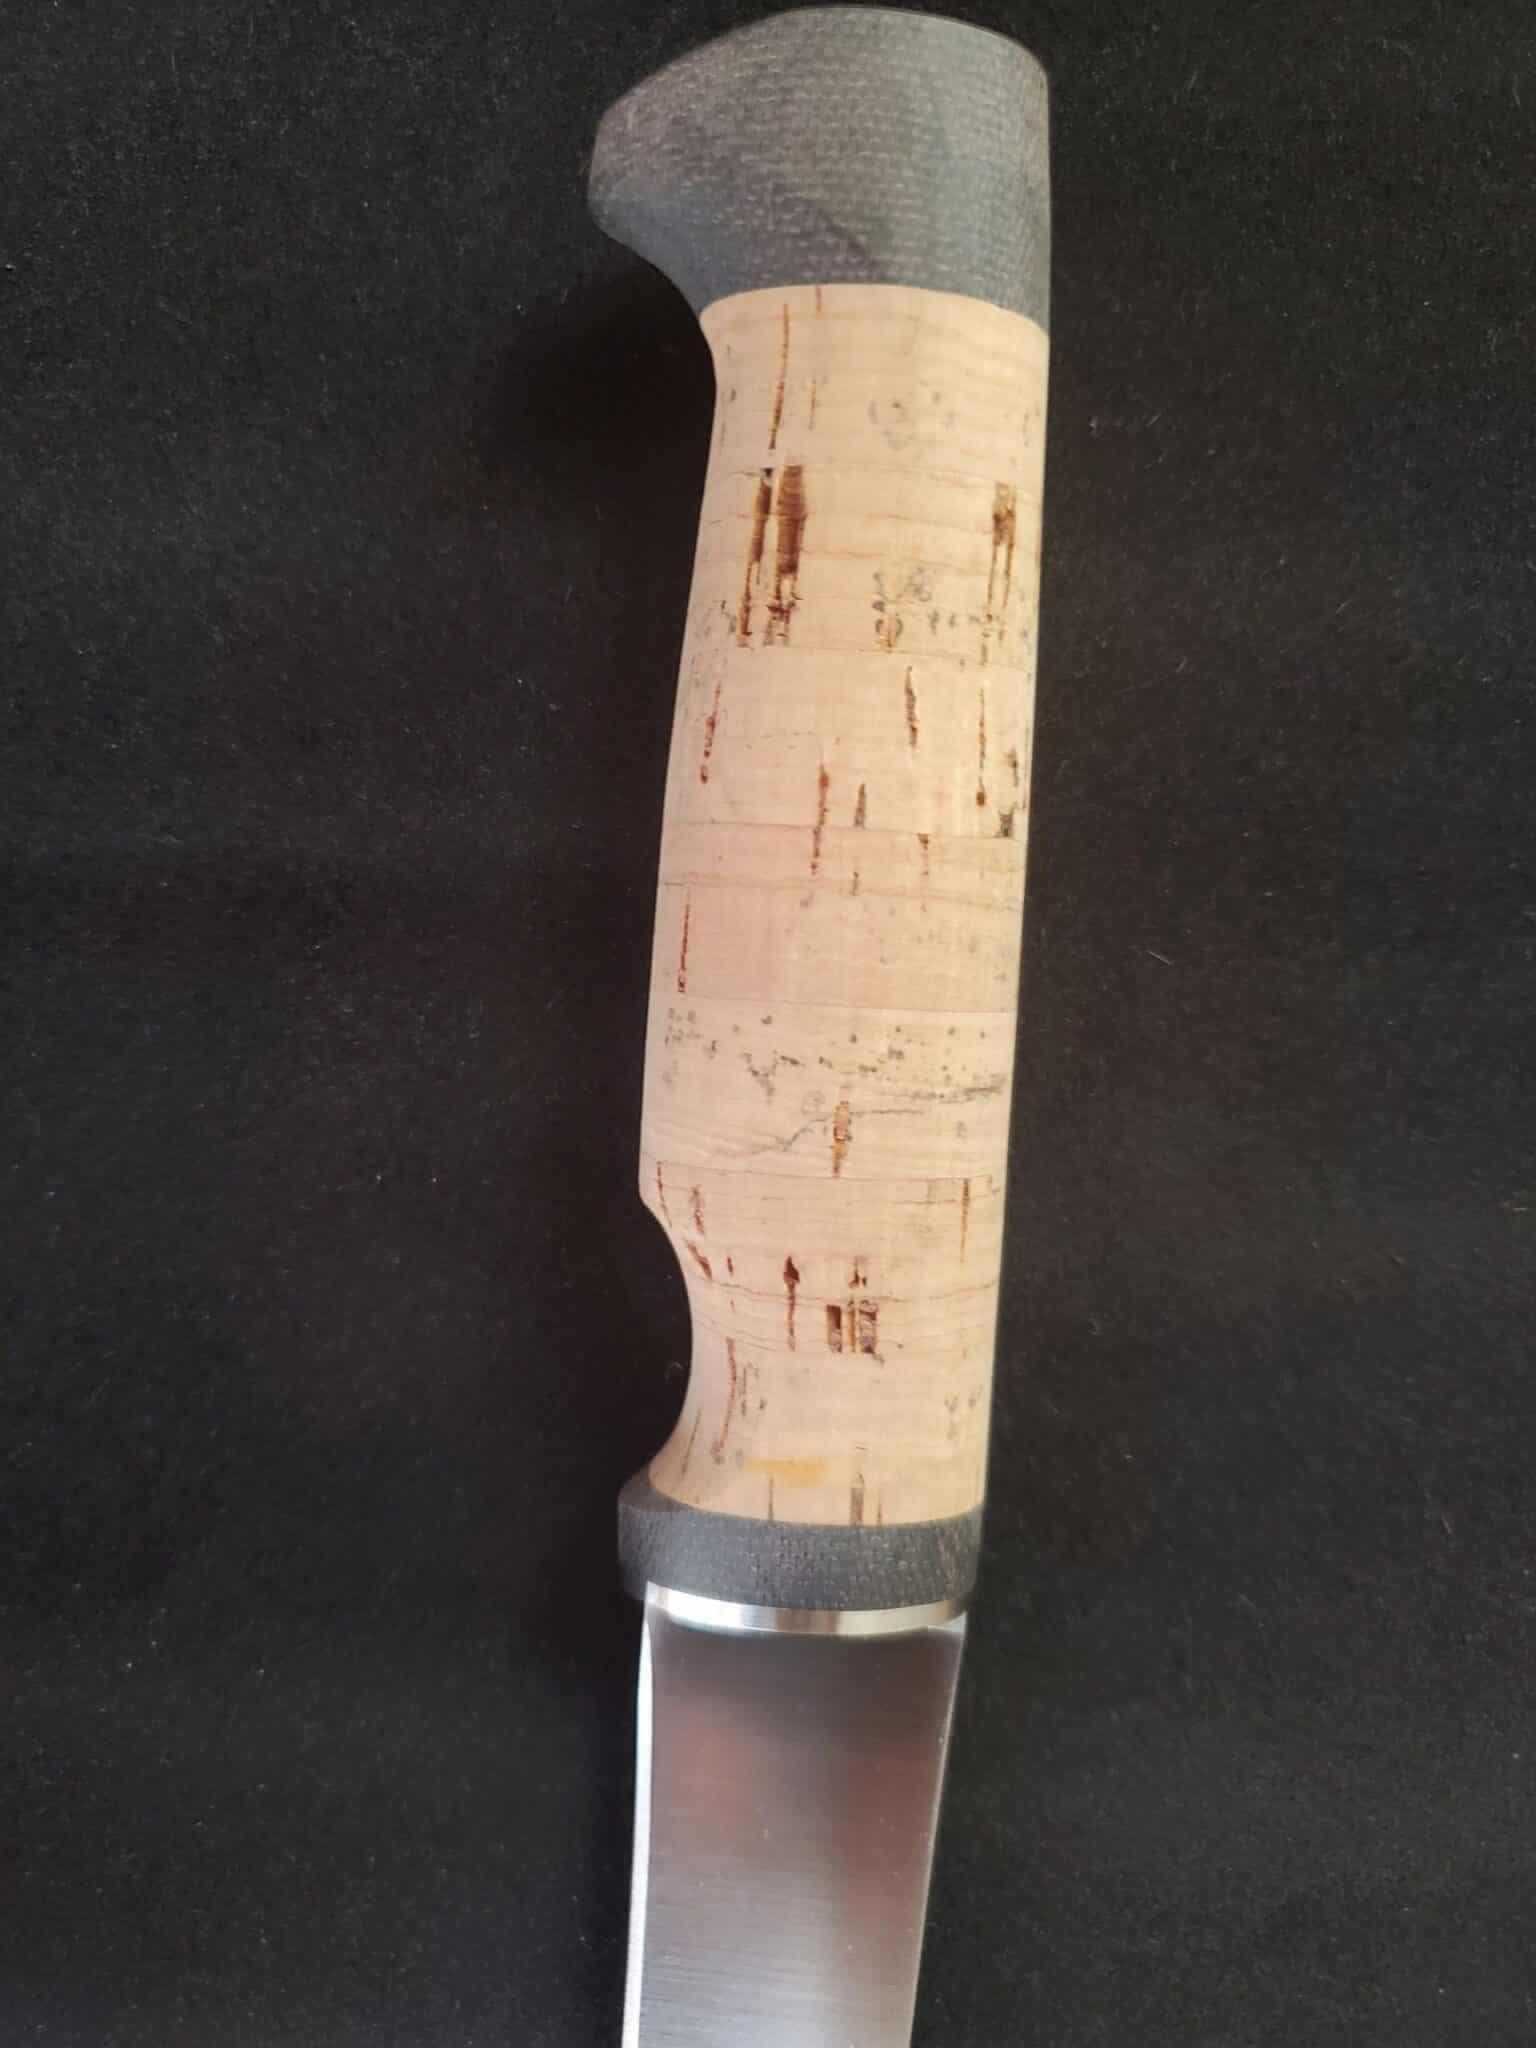 White River Knife & Tool 8.5" Fillet Knife with Cork Handle knives for sale